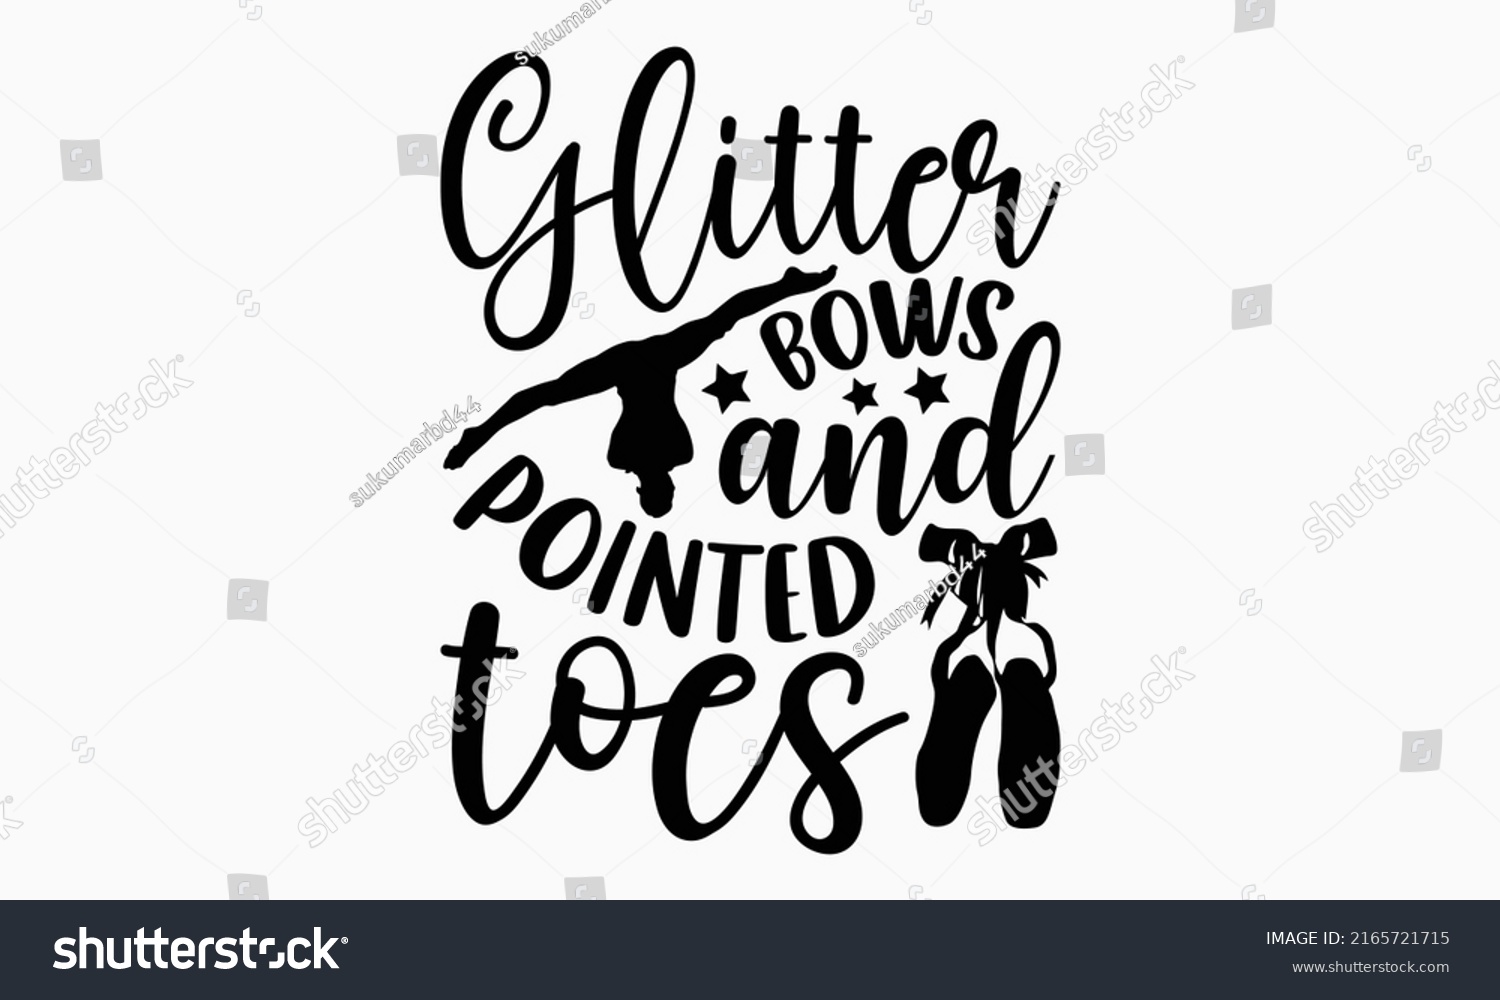 SVG of Glitter bows and pointed toes - Ballet t shirt design, Hand drawn lettering phrase, Calligraphy graphic design, SVG Files for Cutting Cricut and Silhouette svg